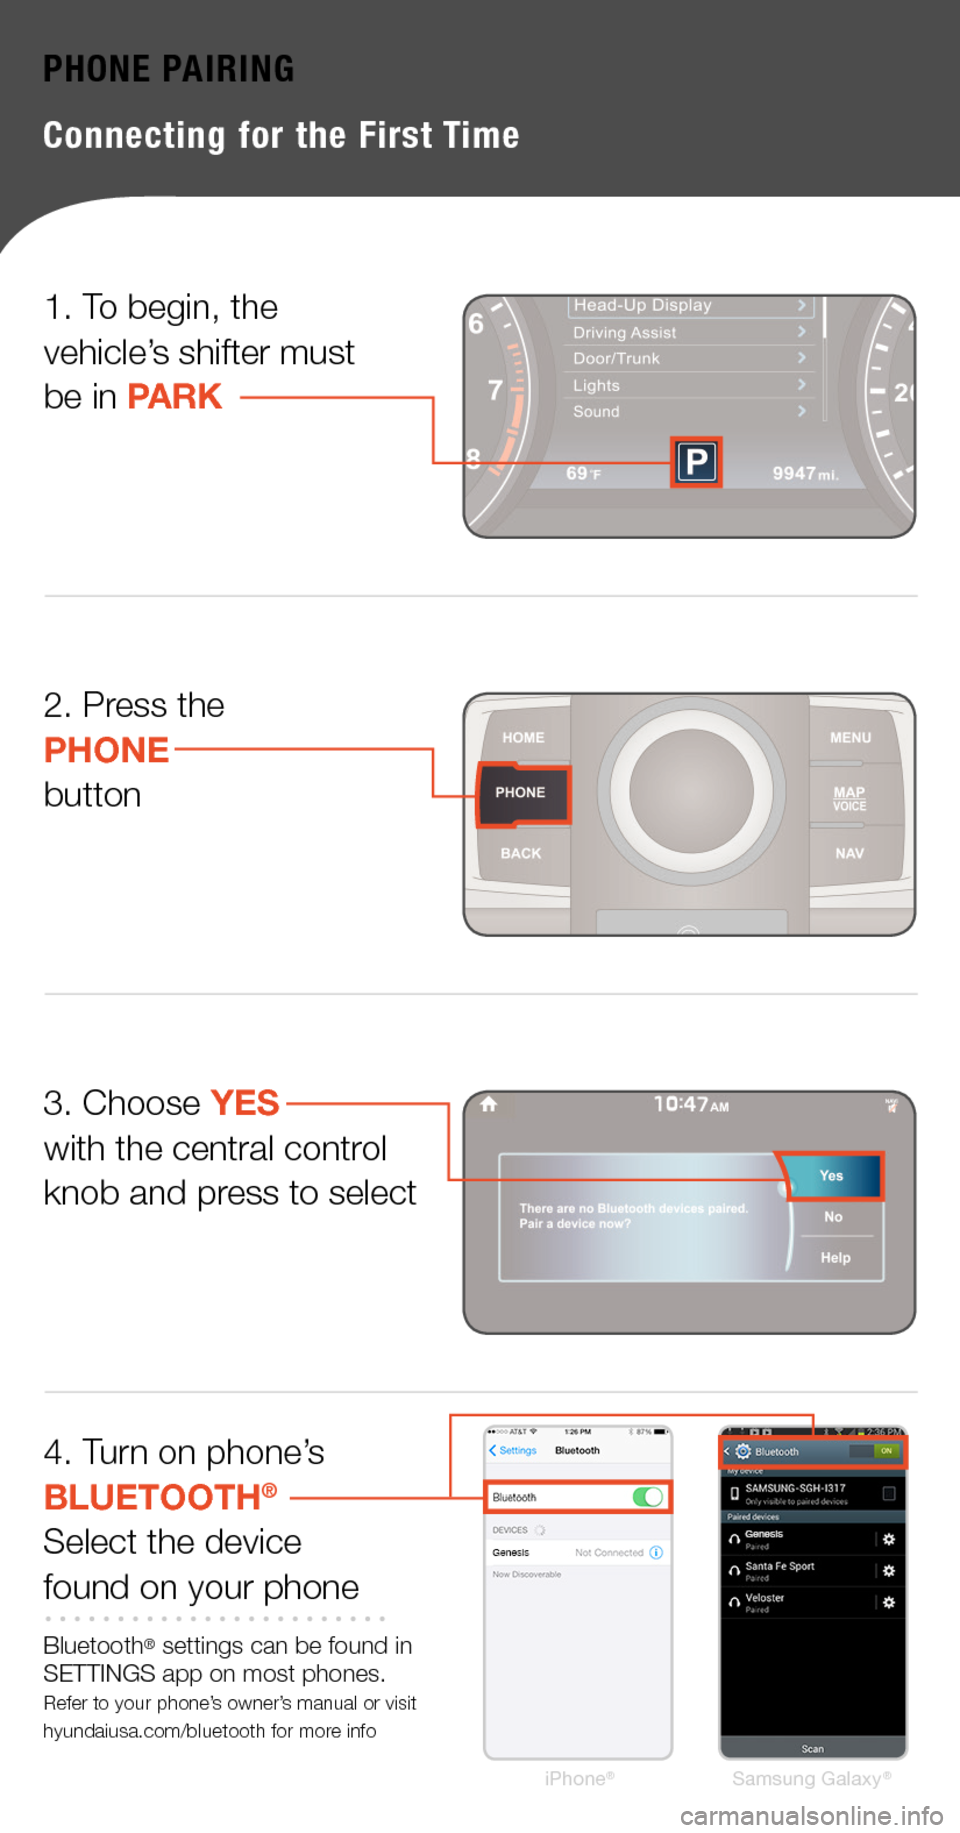 Hyundai Genesis 2015  Quick Tips PHONE PAIRING
Connecting for the First Time
3. Choose YES with the central control knob and press to select
iPhone®Samsung Galaxy®
4. Turn on phone’s  BLUETOOTH®
Select the devicefound on your ph